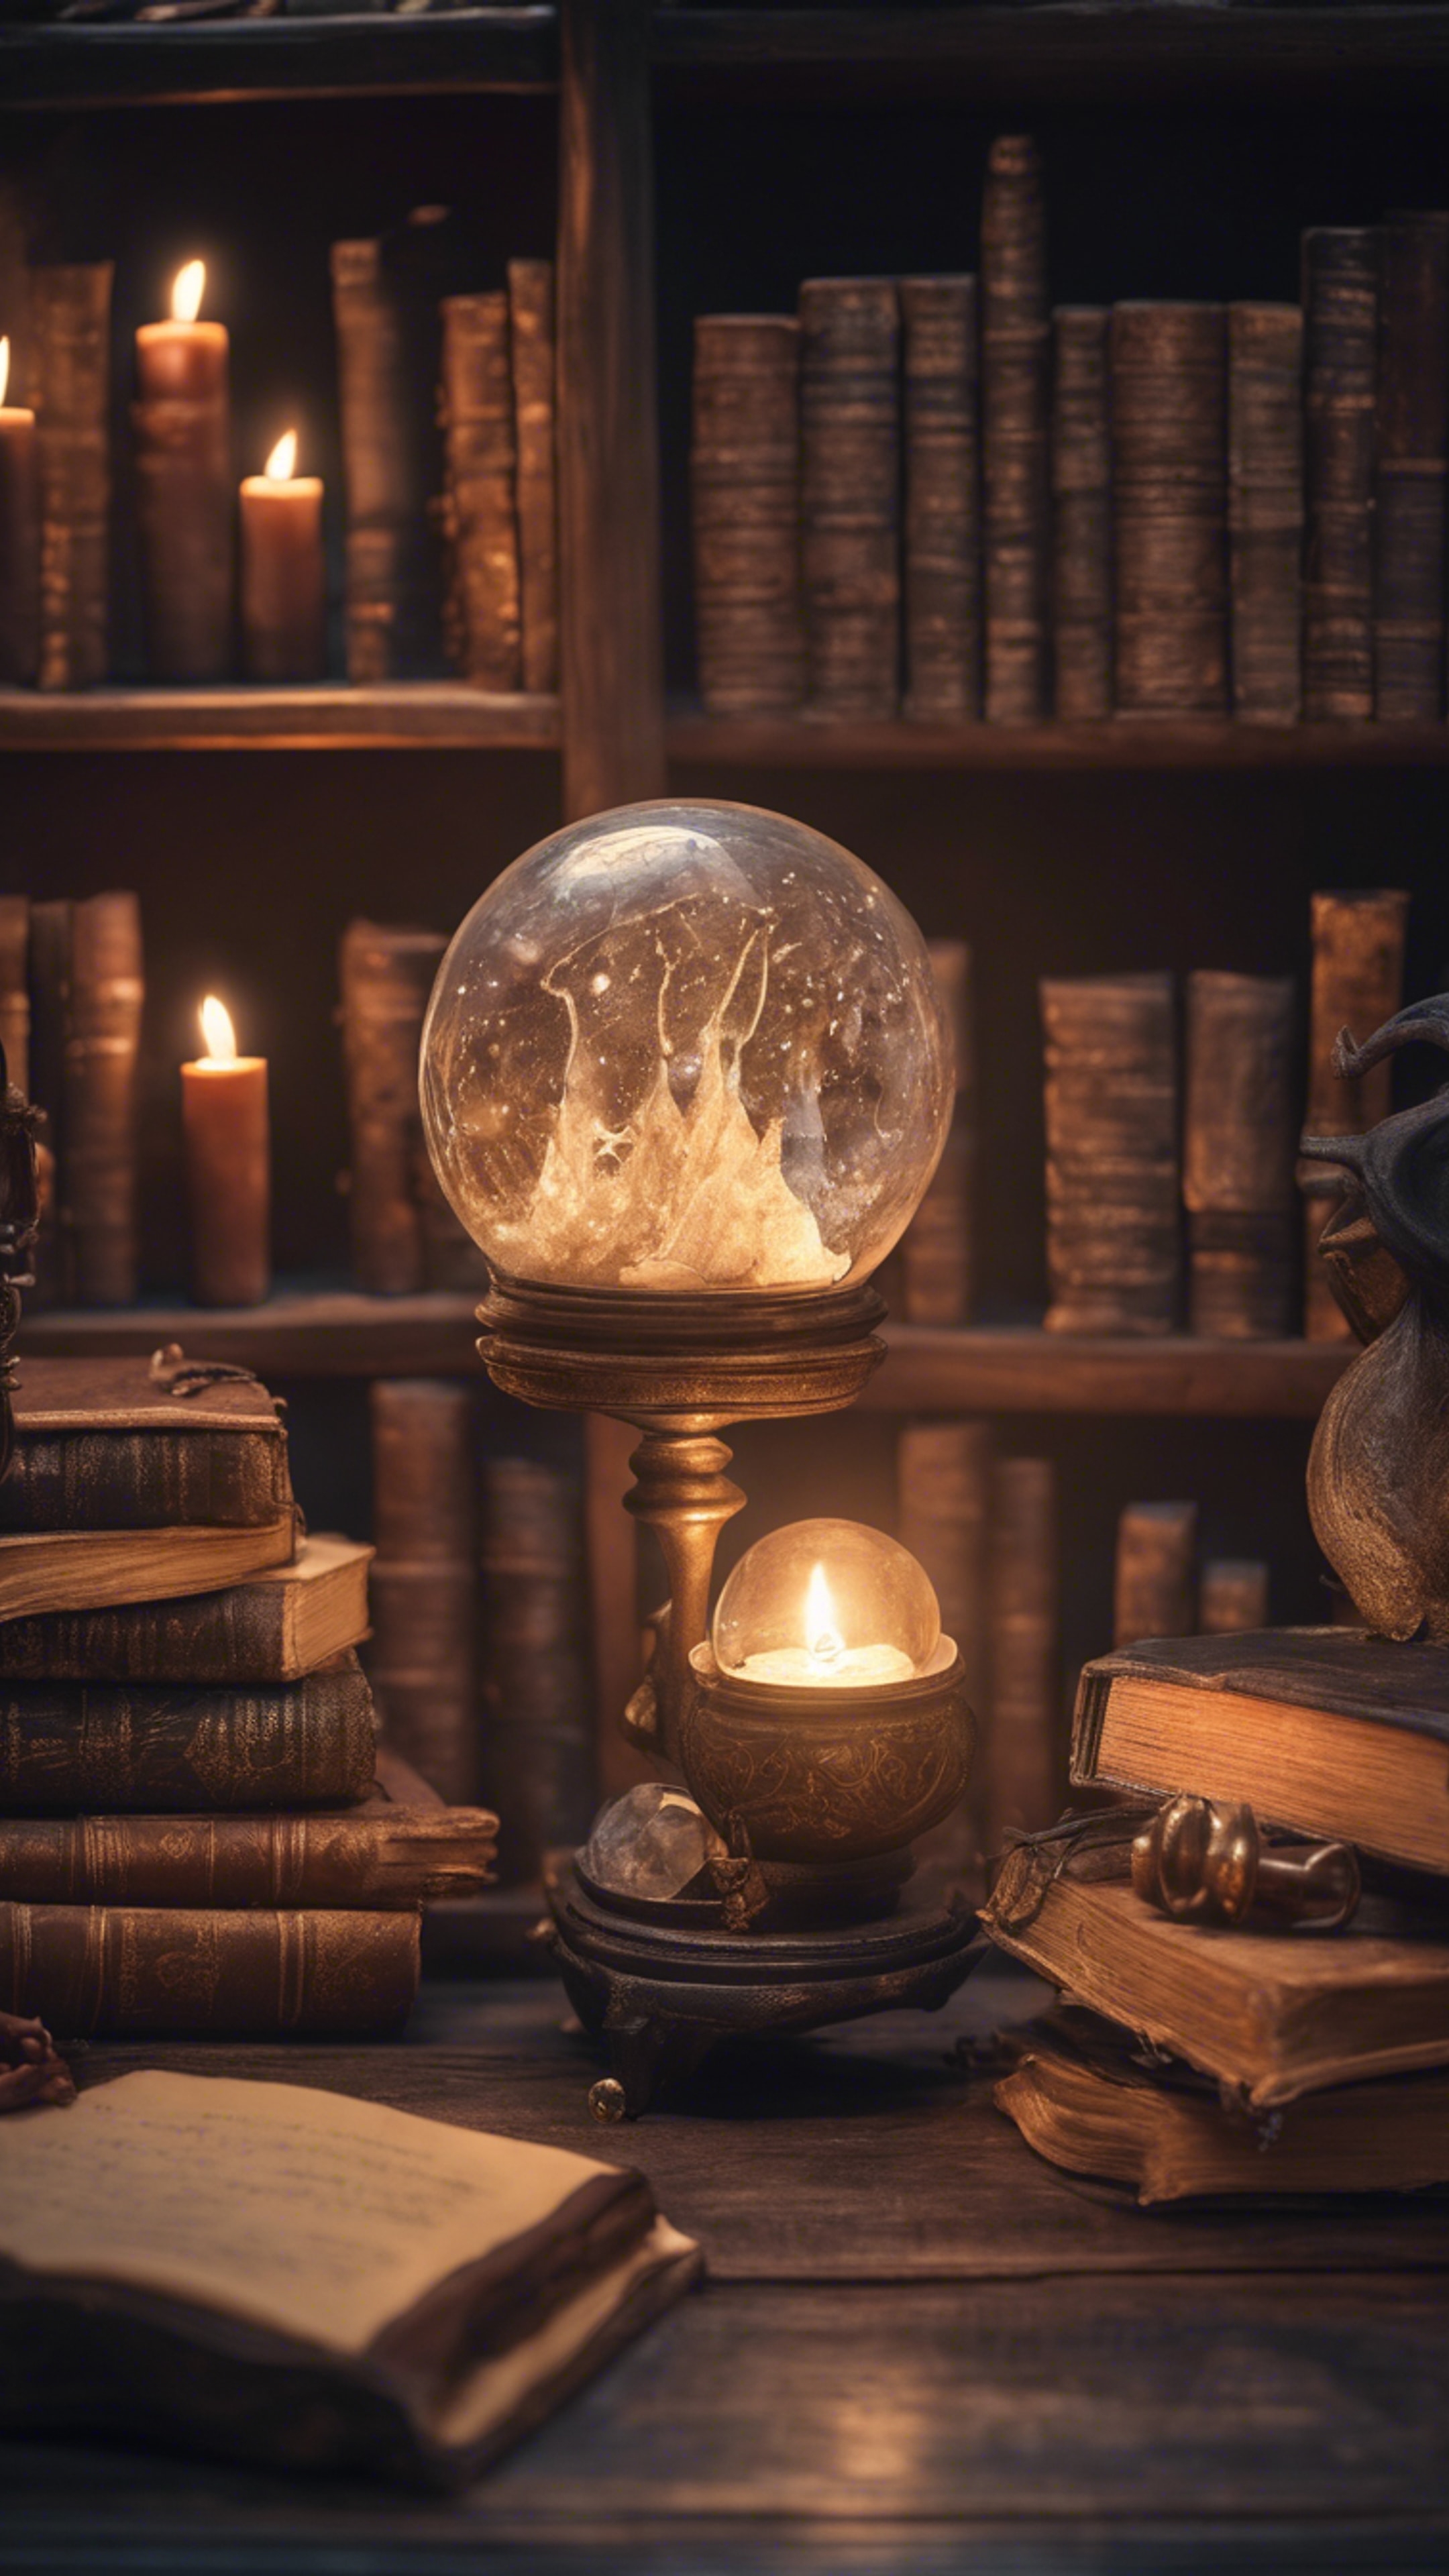 A cozy mystical scene with a wizard’s study room - magical artifacts, rows of spell books, a crystal ball, and a cauldron brewing a potion. Обои[df00e949c5584759a81e]